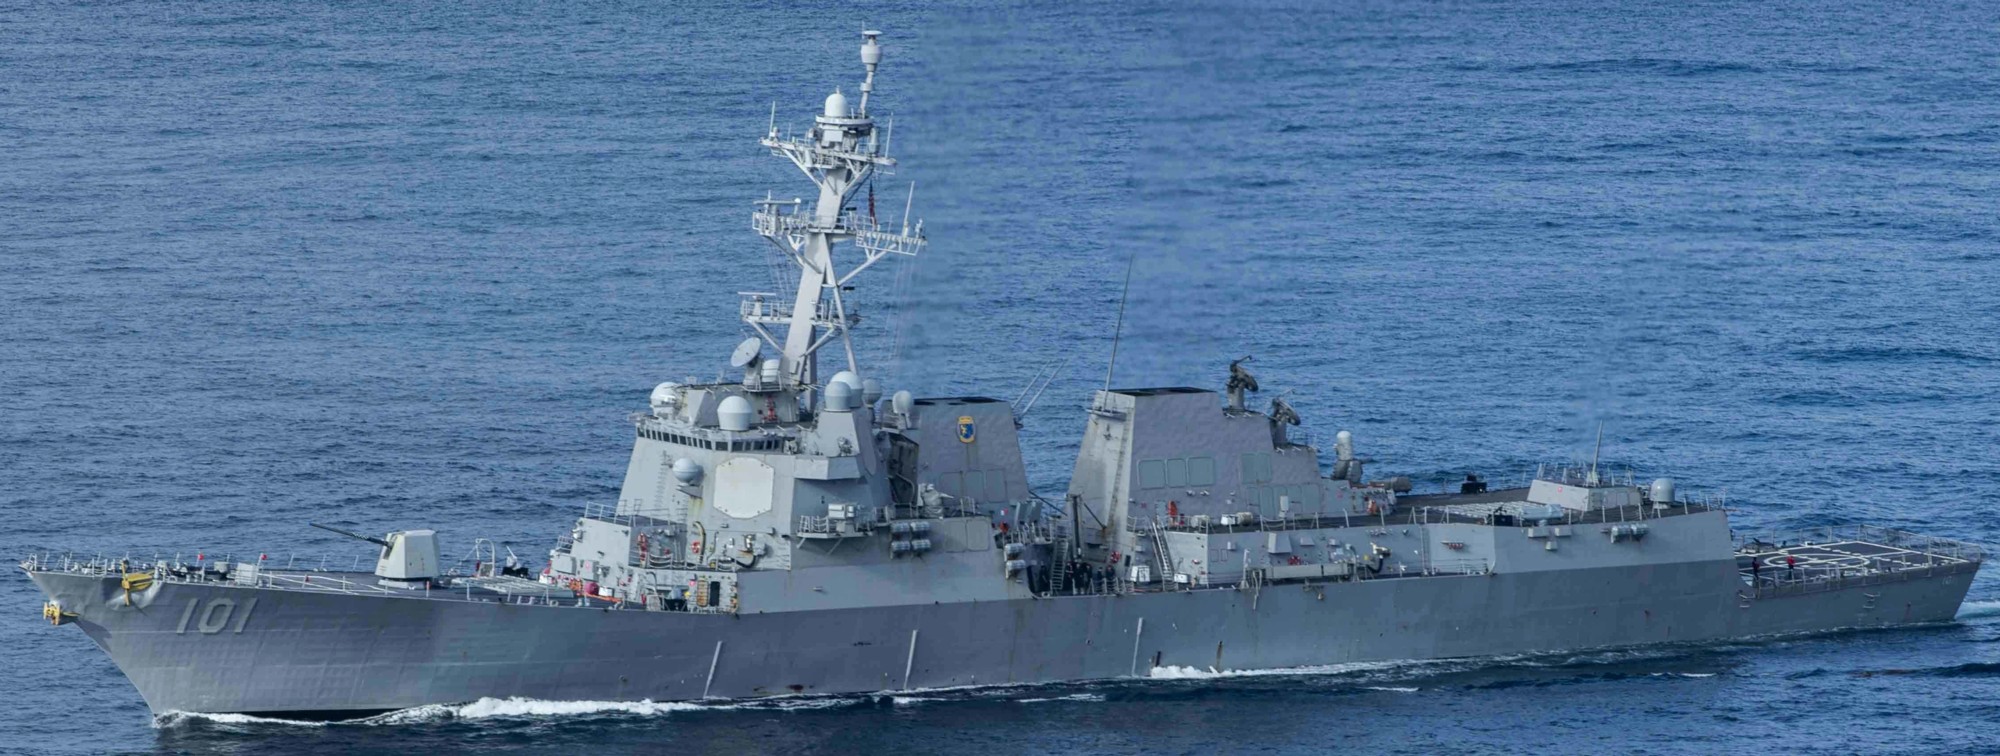 ddg-101 uss gridley arleigh burke class guided missile destroyer aegis us navy 72